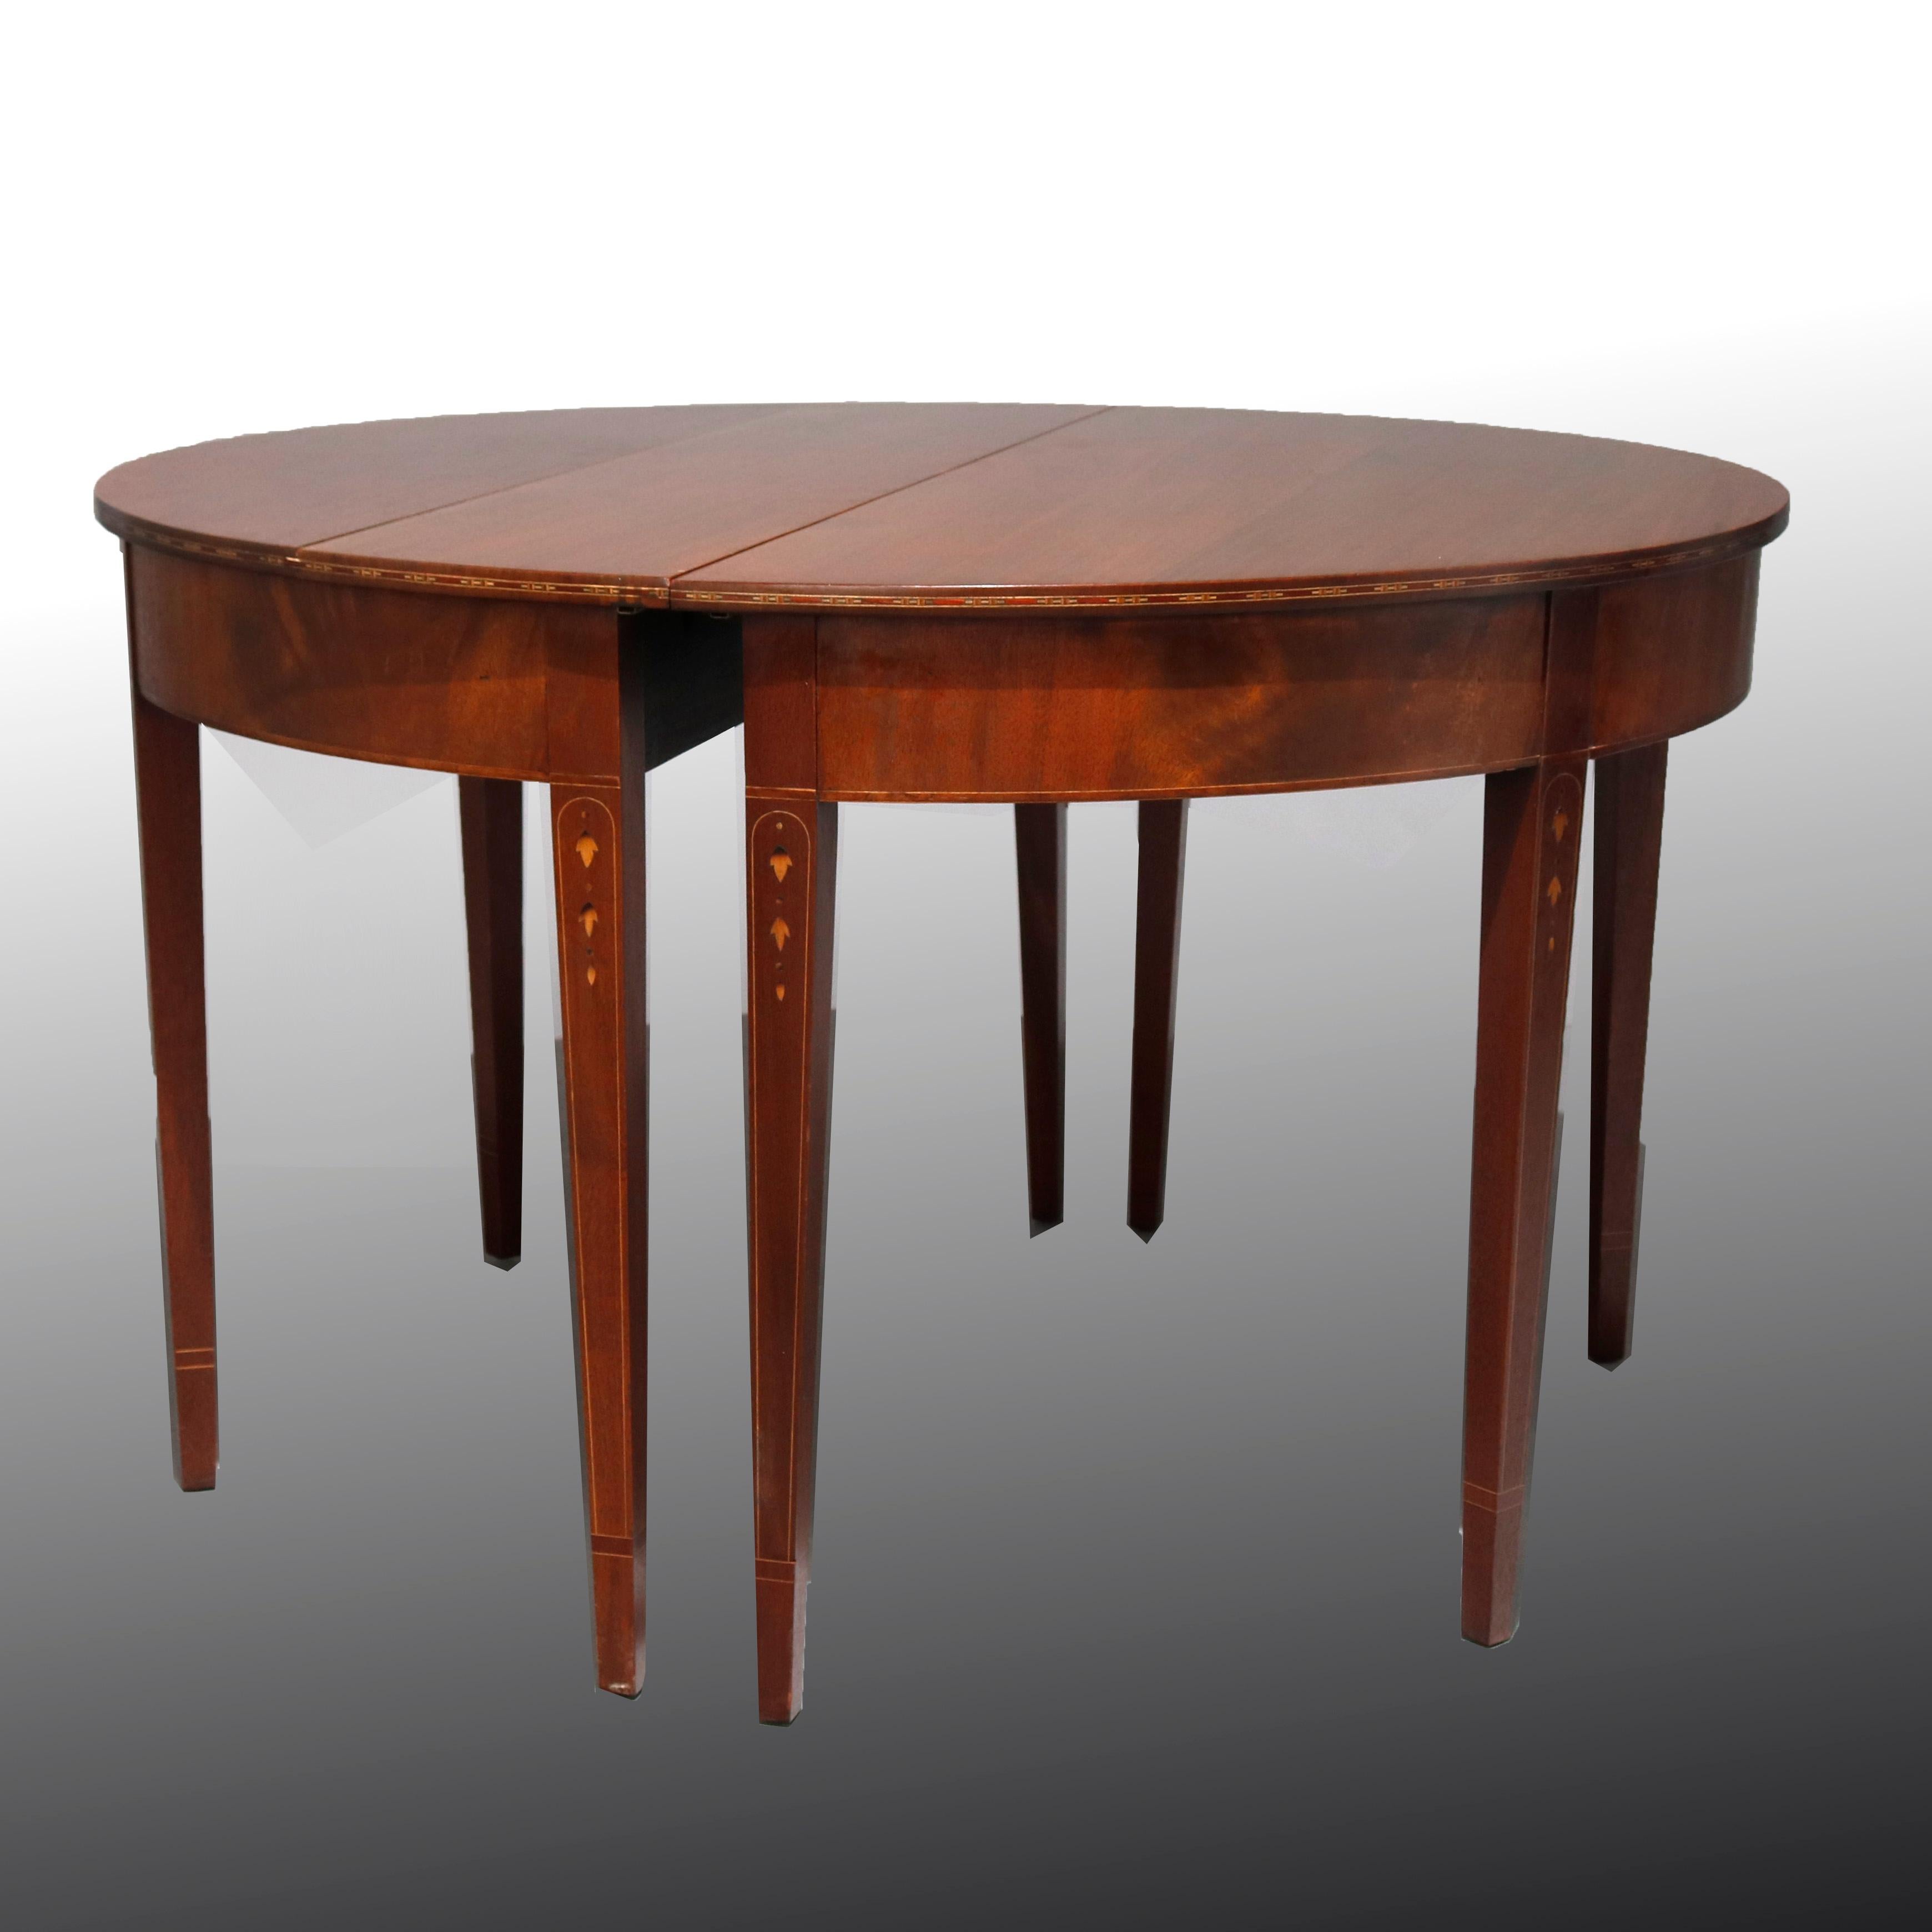 An antique English Hepplewhite style banquet table offers flame mahogany construction with top having deep skirt and raised on square and tapered legs with inlaid satinwood banding and inverted bellflowers, includes two demilune ends with central